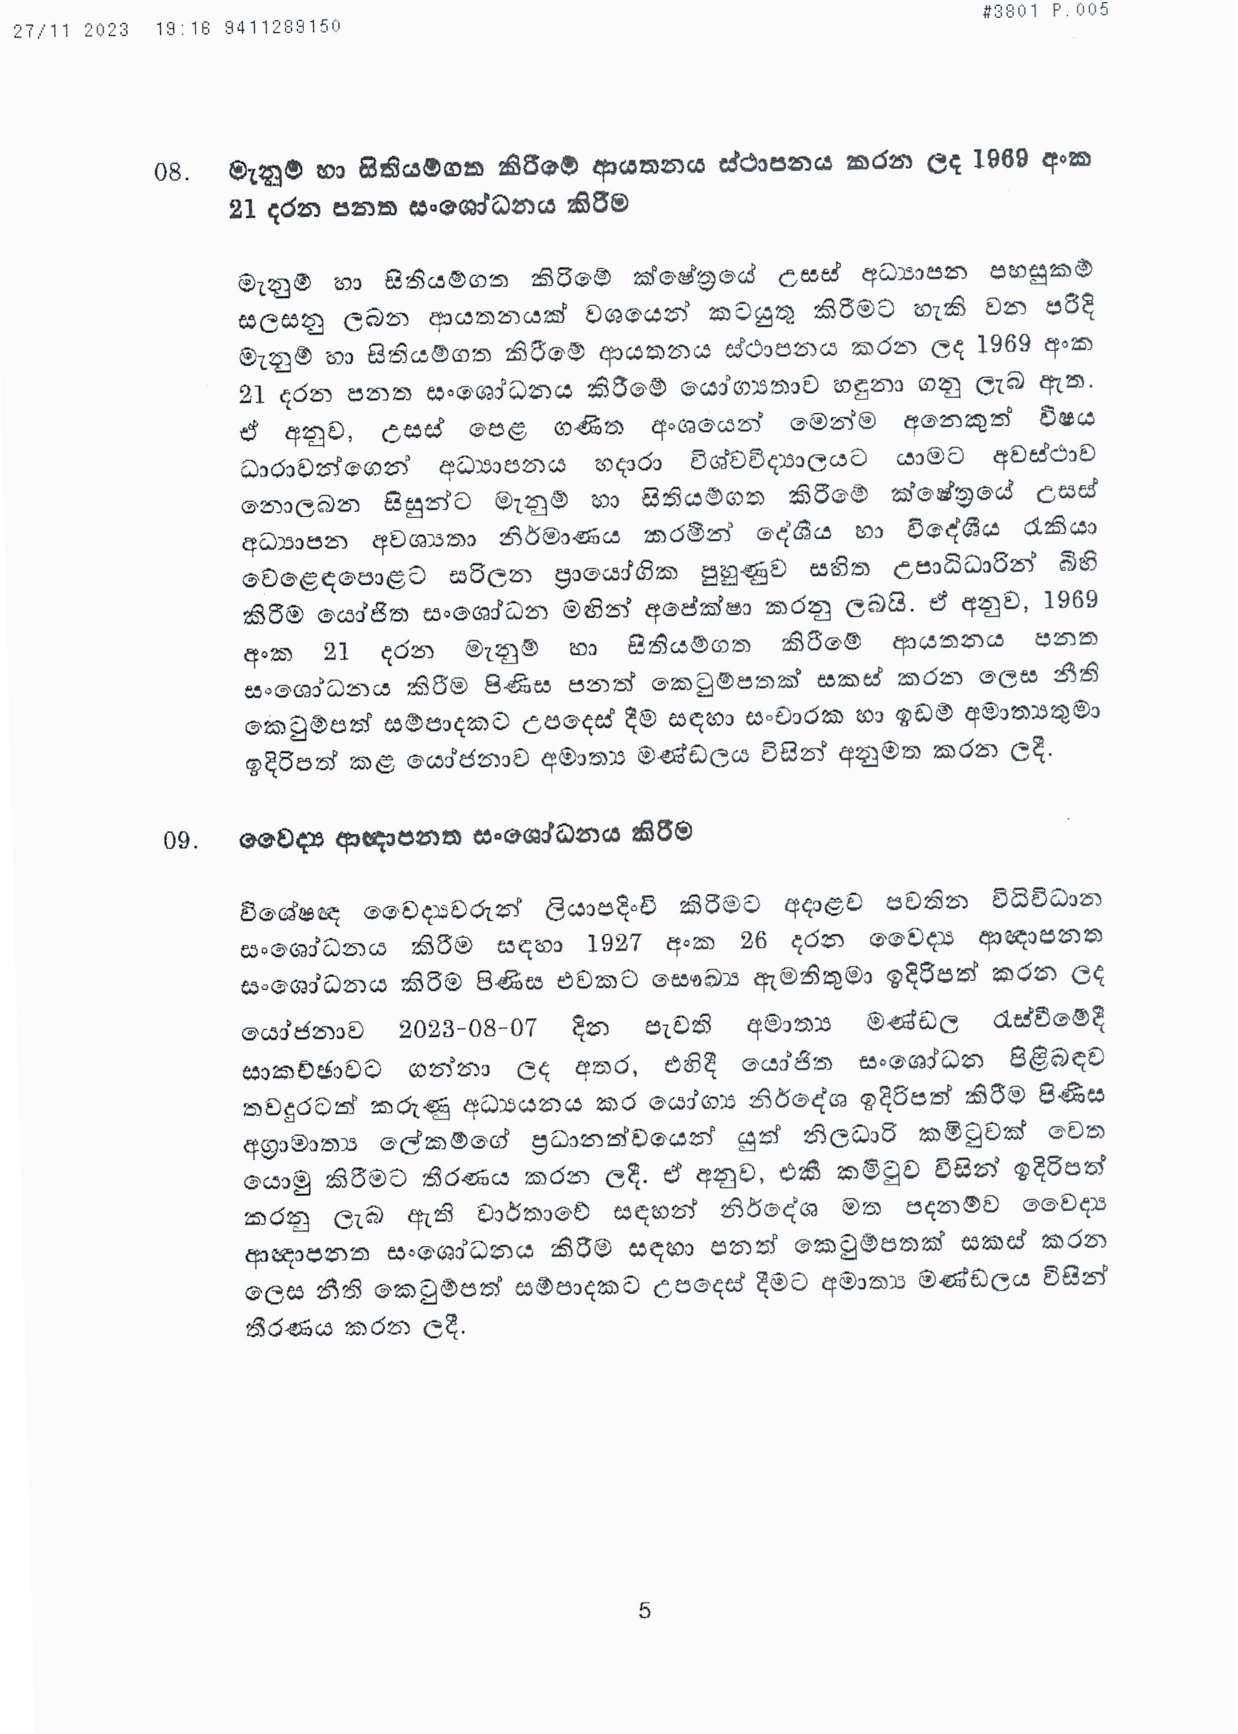 Cabinet Decision on 27.11.2023 page 005